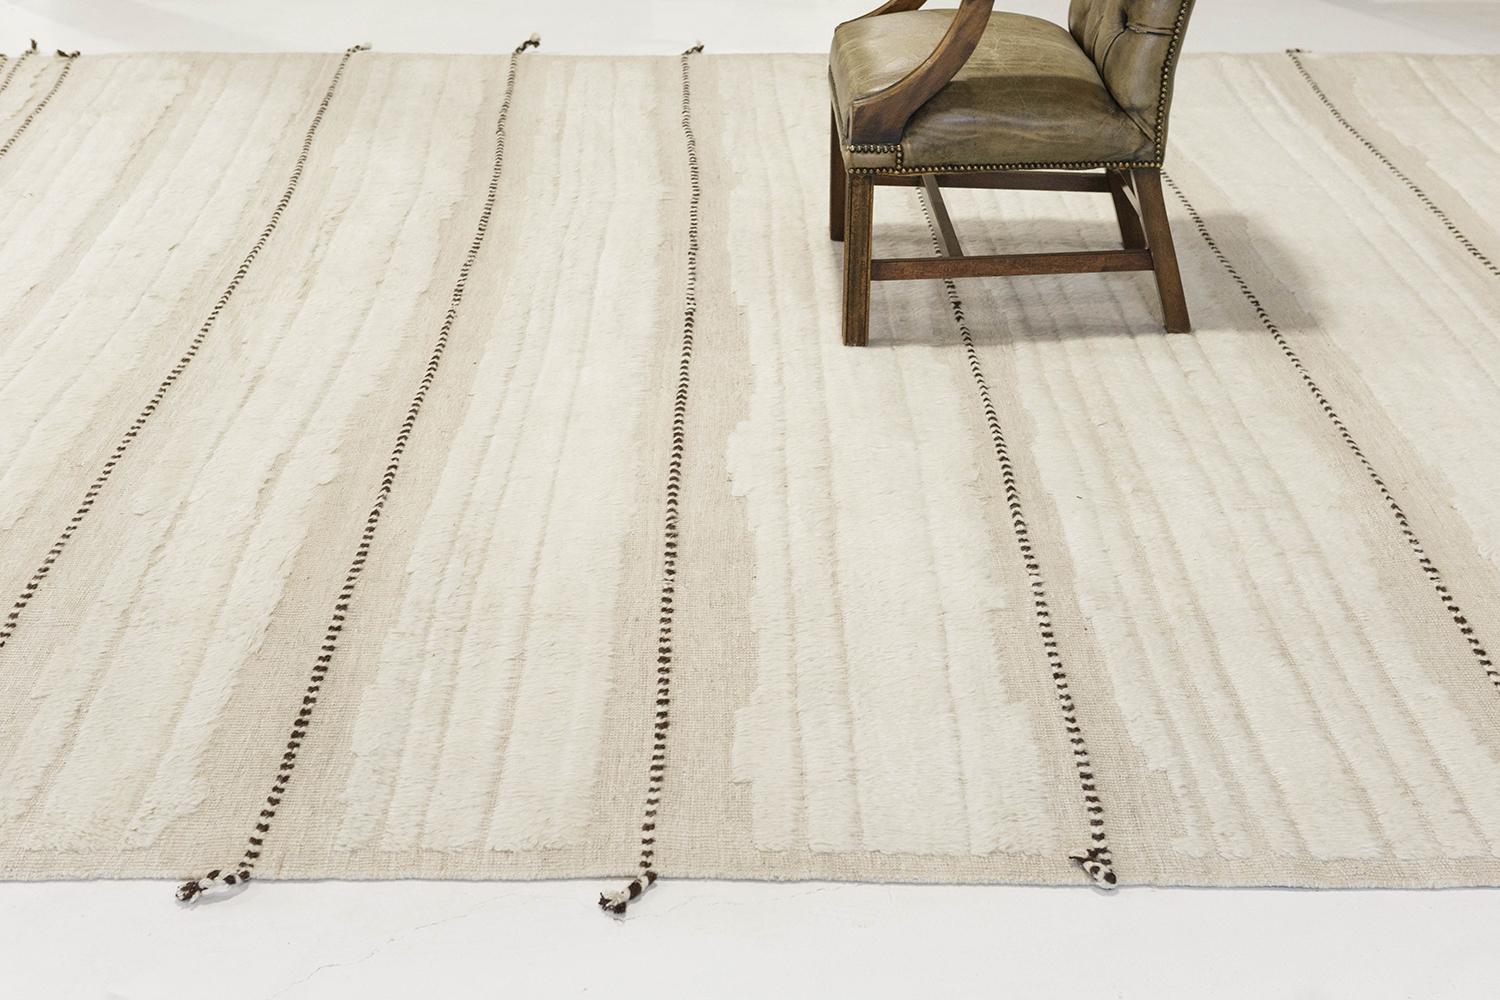 'Kit Moresby' has become a Los Angeles staple. The signature rug of Malibu. Handwoven of luxurious wool, with timeless design elements and color palette. This Mehraban design is a contemporary interpretation of an Azilal, a part of our Atlas